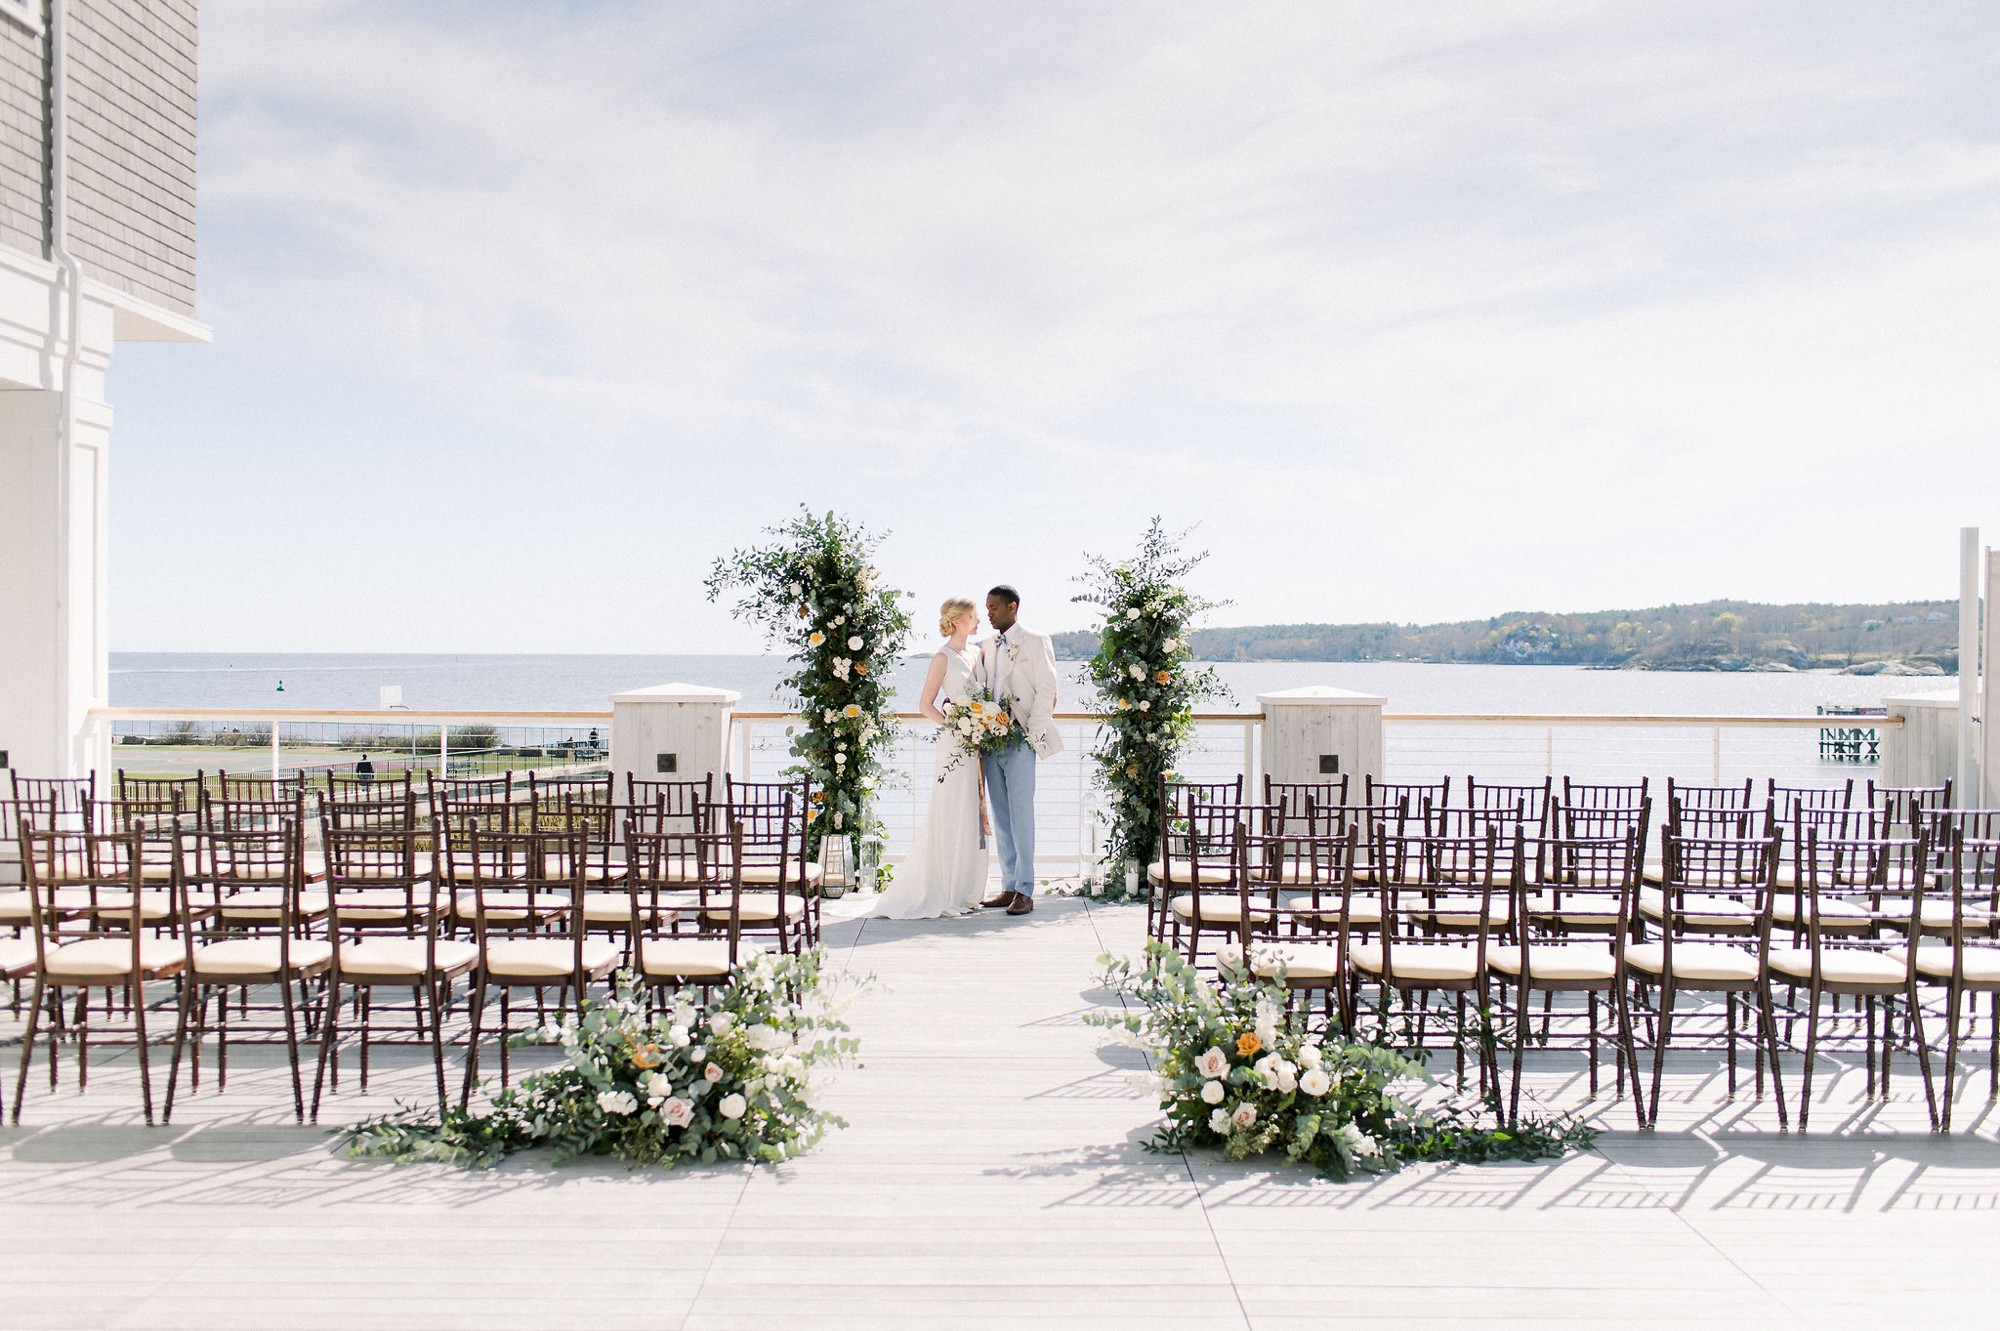 Gloucester MA Beauport Hotel Wedding | Tuscan meets modern | outdoor ceremony by the ocean with flower pillars and modern looks for bride and groom | summer wedding